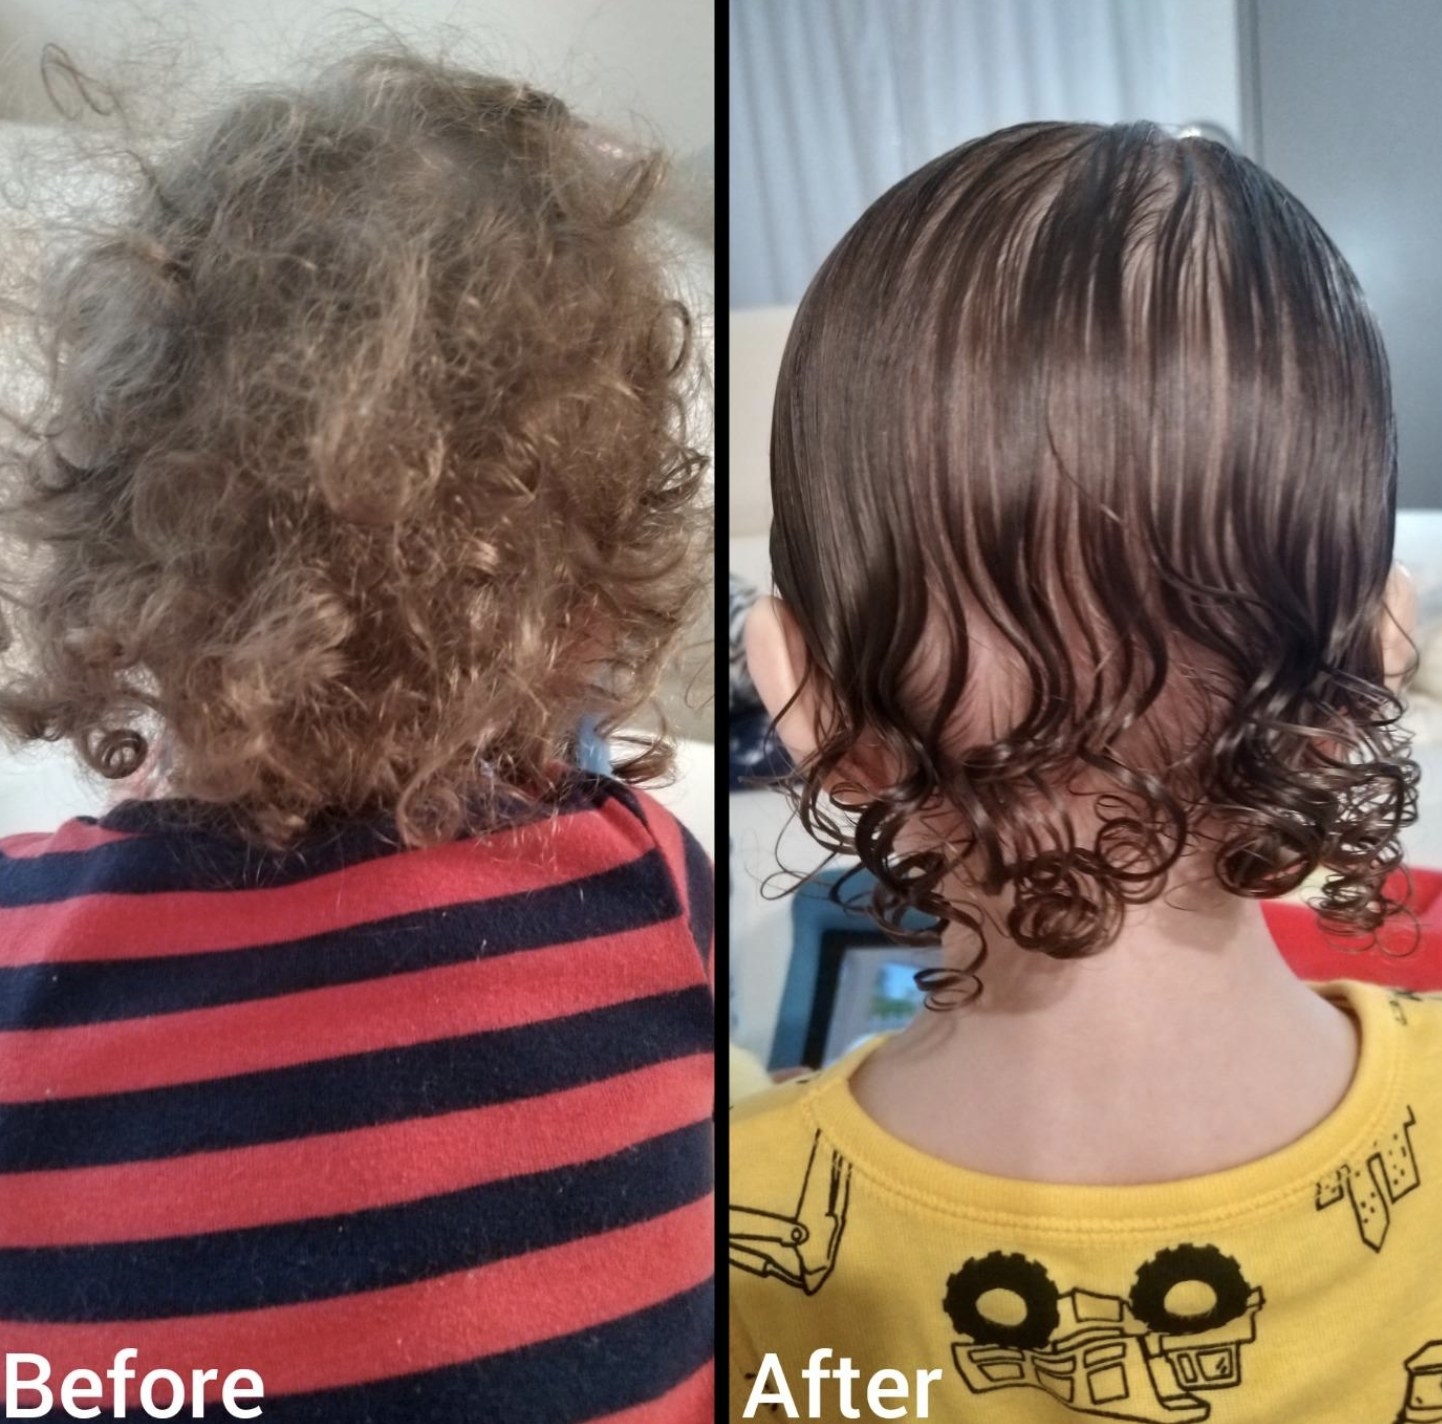 before and after showing toddler&#x27;s curly hair completely combed and detangled after using the product